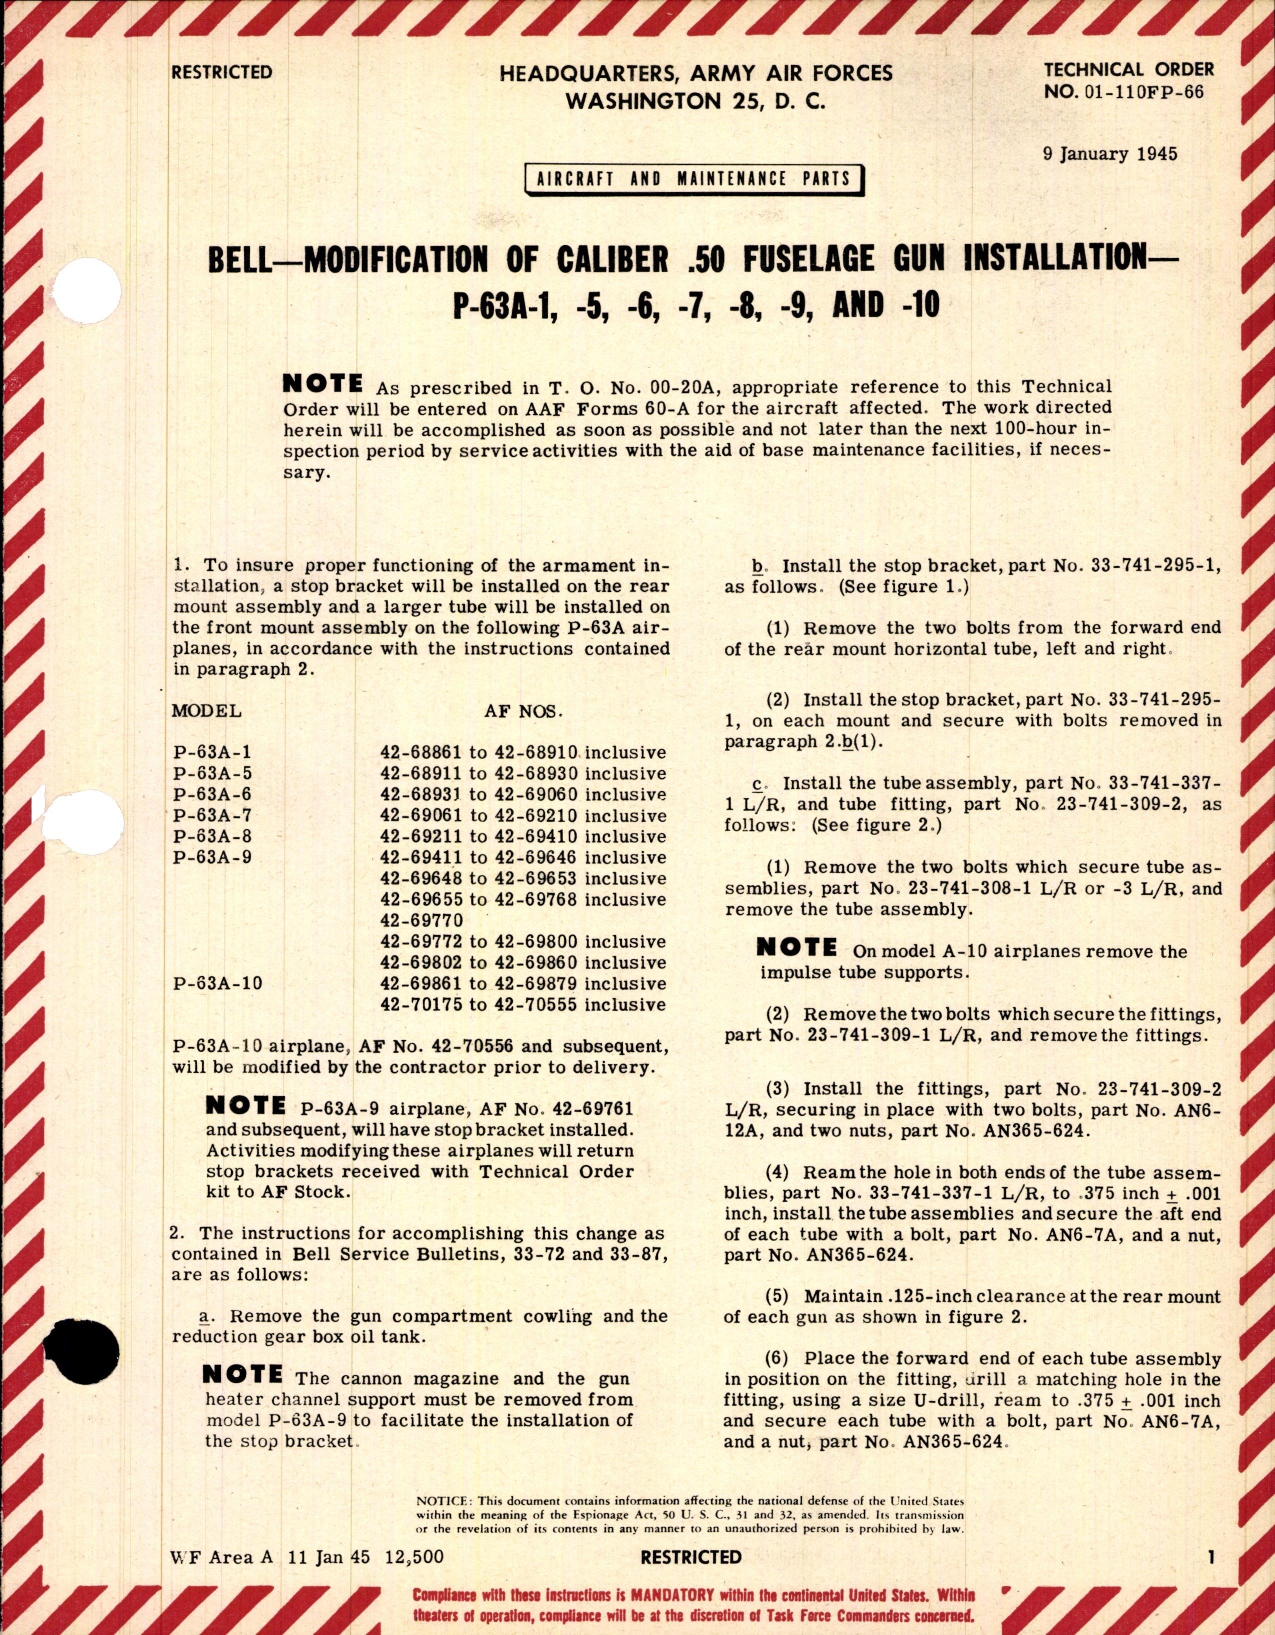 Sample page 1 from AirCorps Library document: Modification of Caliber .50 Fuselage Gun Installation